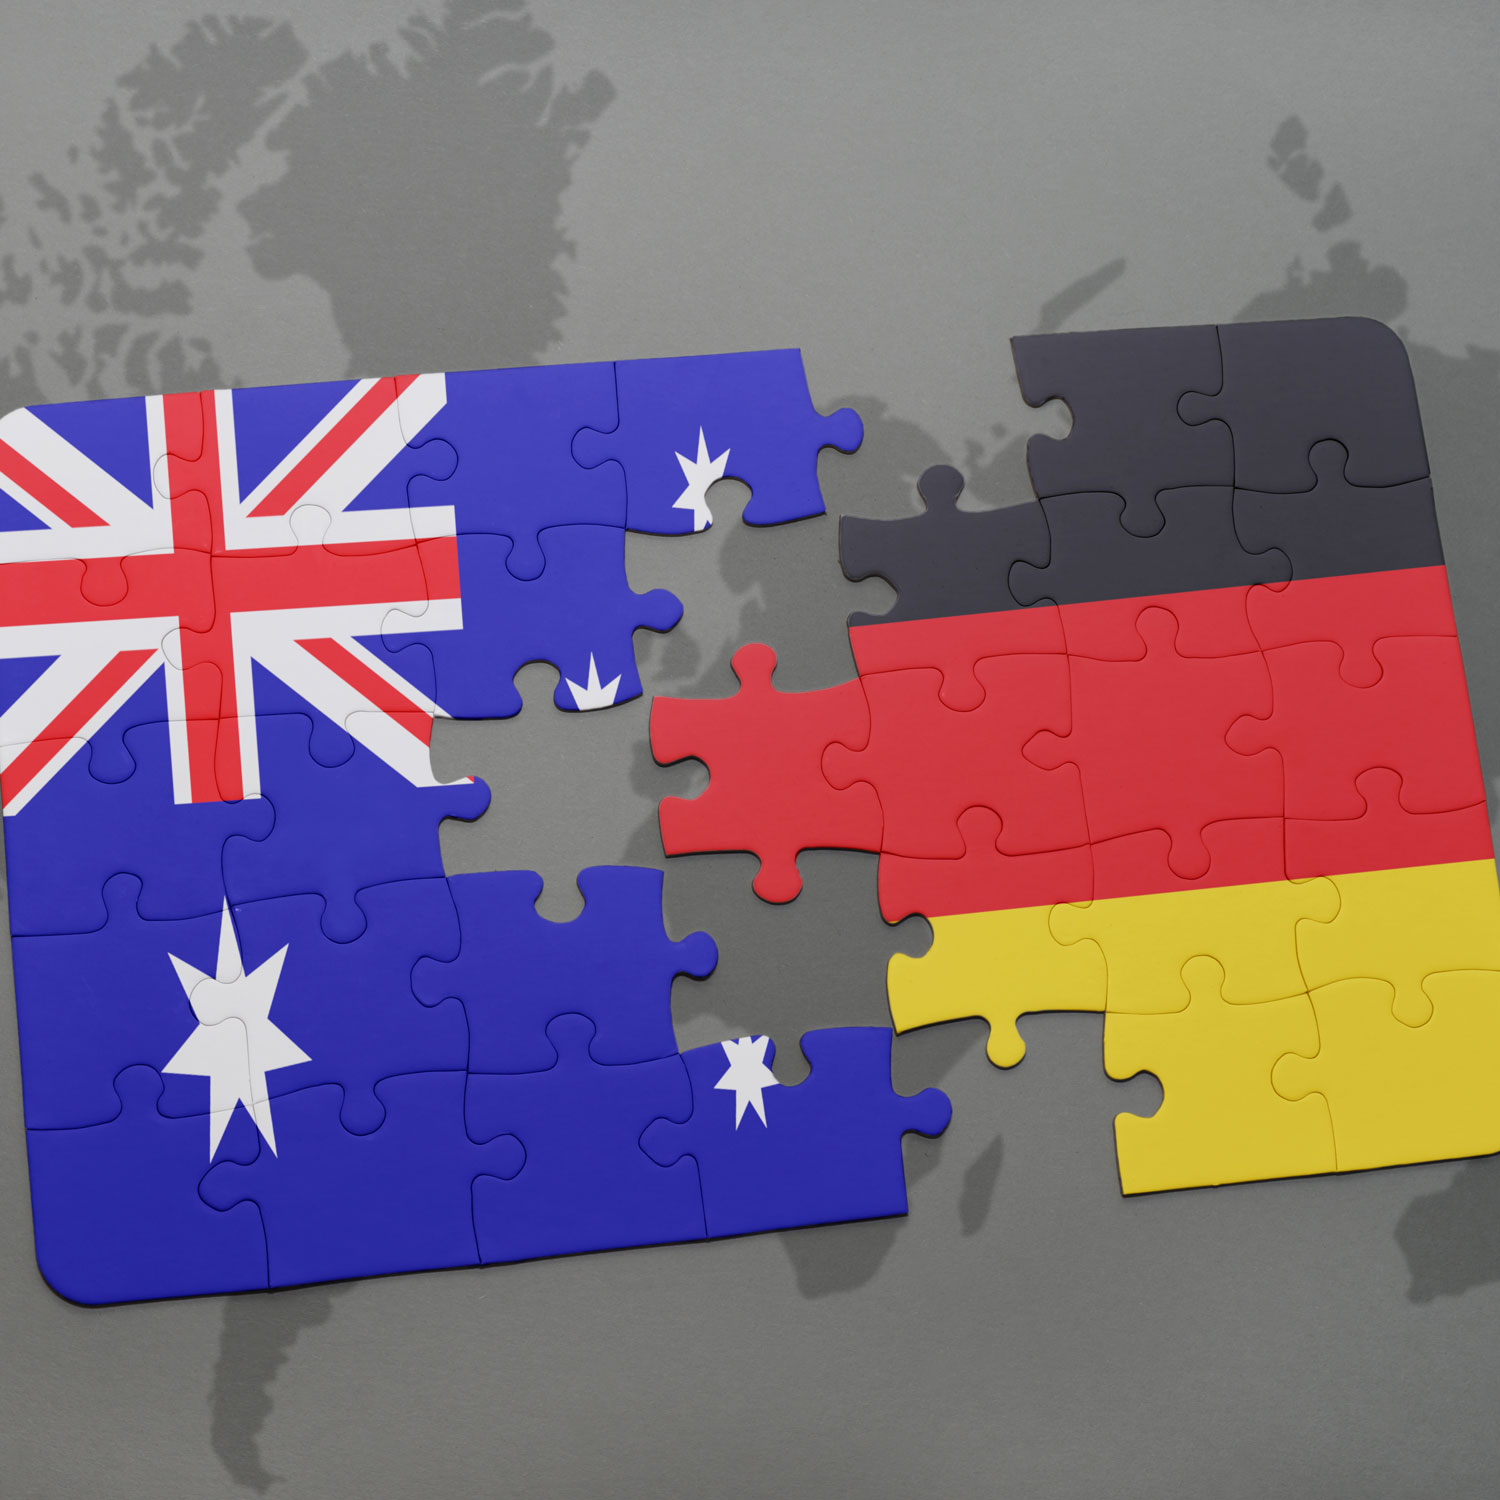 Australia-Germany links forged through new Research Grants